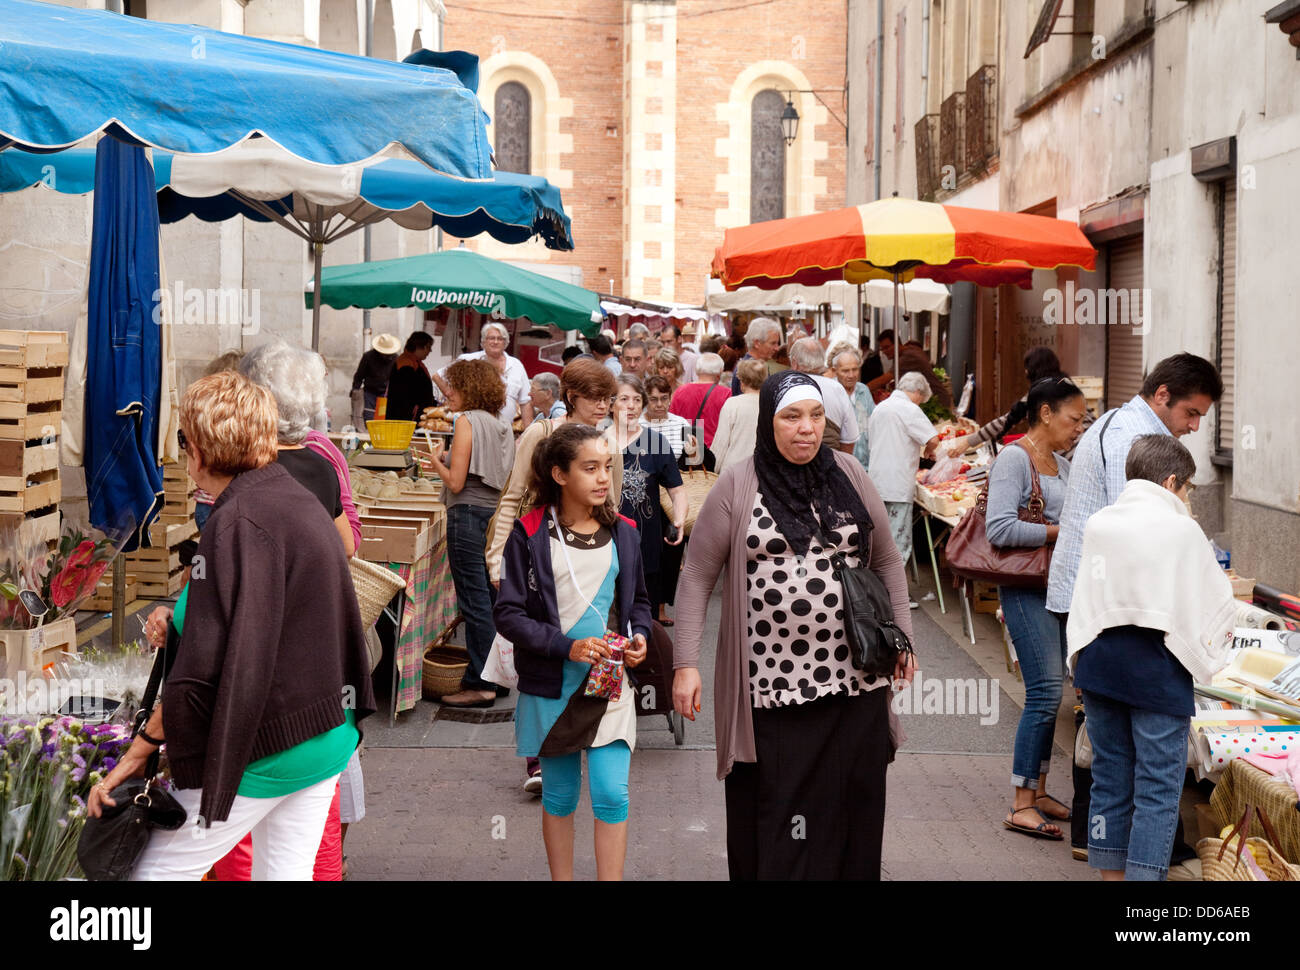 A moslem family shopping in a French market, Ste Liverade sur Lot, Lot et Garonne, France Europe Stock Photo